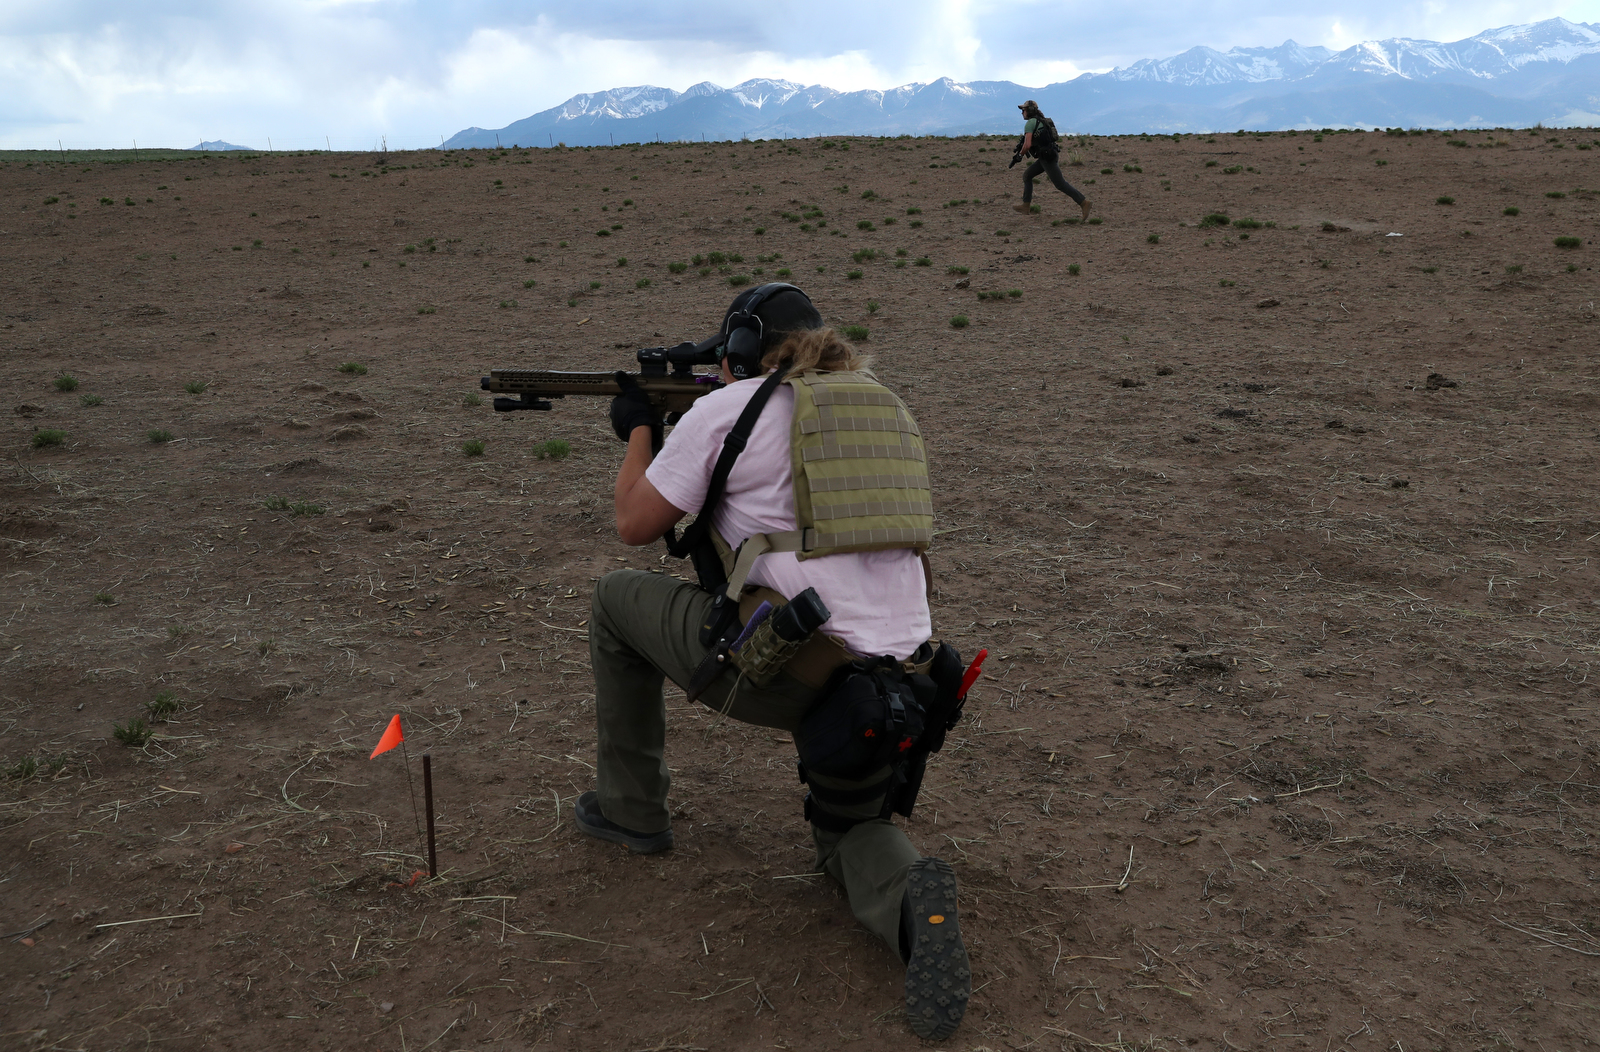 Penny Logue lays down cover fire as J Stanley and Bonnie Nelson run ahead during a live fire drill at their range on the Tenacious Unicorn Ranch in Westcliffe, Colorado. The group say they have stepped up their training since they started receiving death threats and caught armed people on their property. 